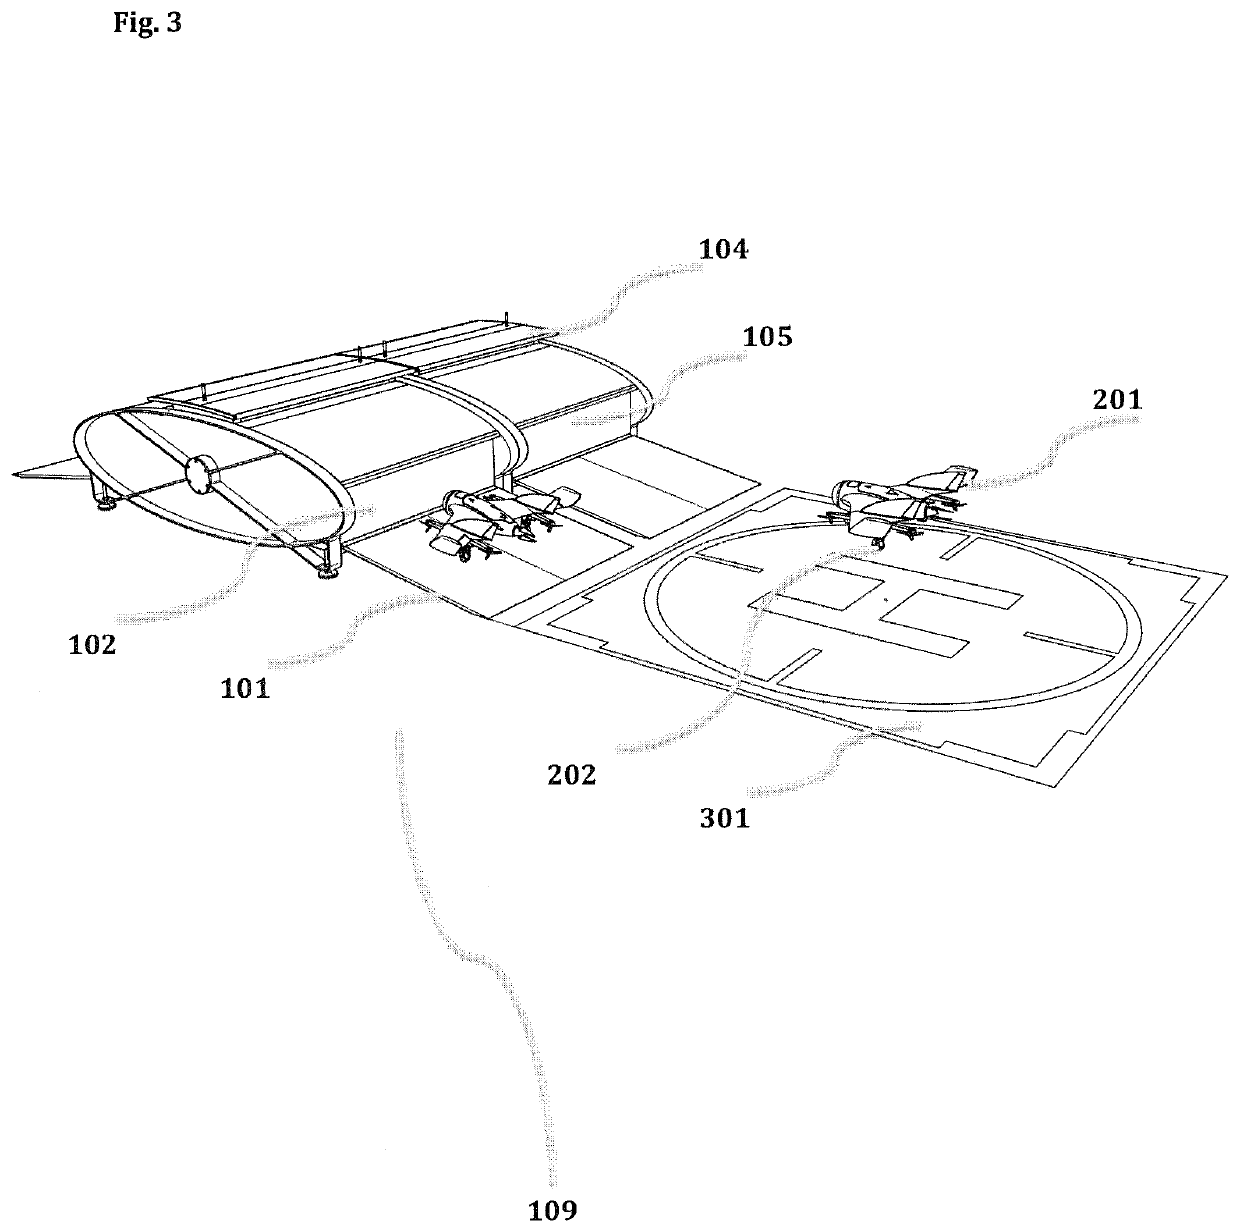 Docking and recharging station for unmanned aerial vehicles capable of ground movement